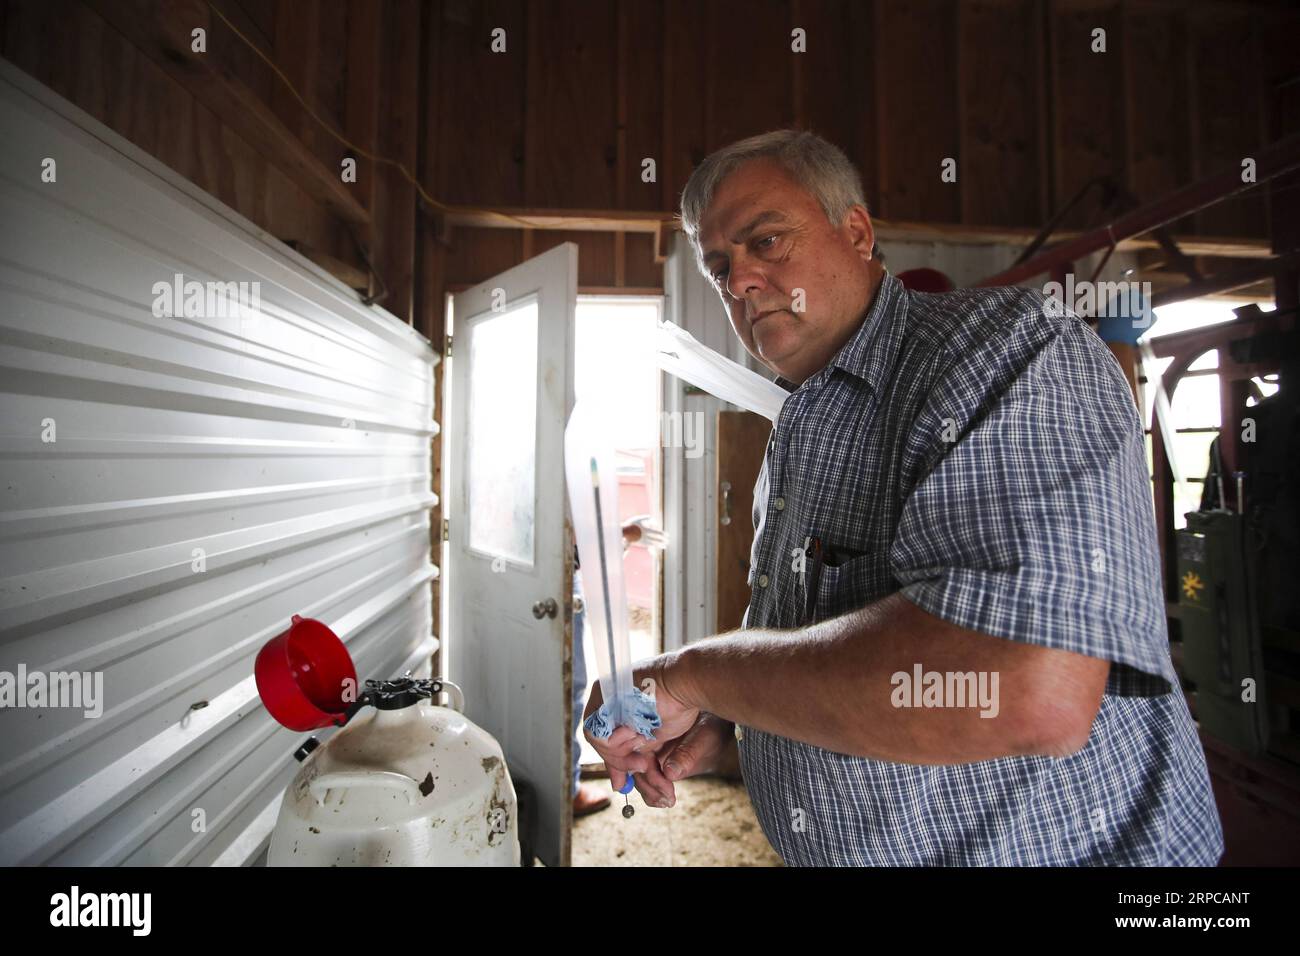 (190629) -- ATLANTIC (U.S.), June 29, 2019 -- Bill Pellett s long-time business partner Phil Ham prepares a syringe for his son Cody Ham during artificial insemination procedures on Bill Pellett s farm in Atlantic, Iowa, the United States, on June 20, 2019. Bill Pellett, a fifth-generation farmer in Atlantic, a small city in the U.S. Midwestern state of Iowa, has found a cost-effective way to raise better calves each year without purchasing new bulls -- artificial insemination (AI). ) TO GO WITH Feature: U.S. cattle farmer turns to artificial insemination for better quality beef U.S.-IOWA-ATLA Stock Photo